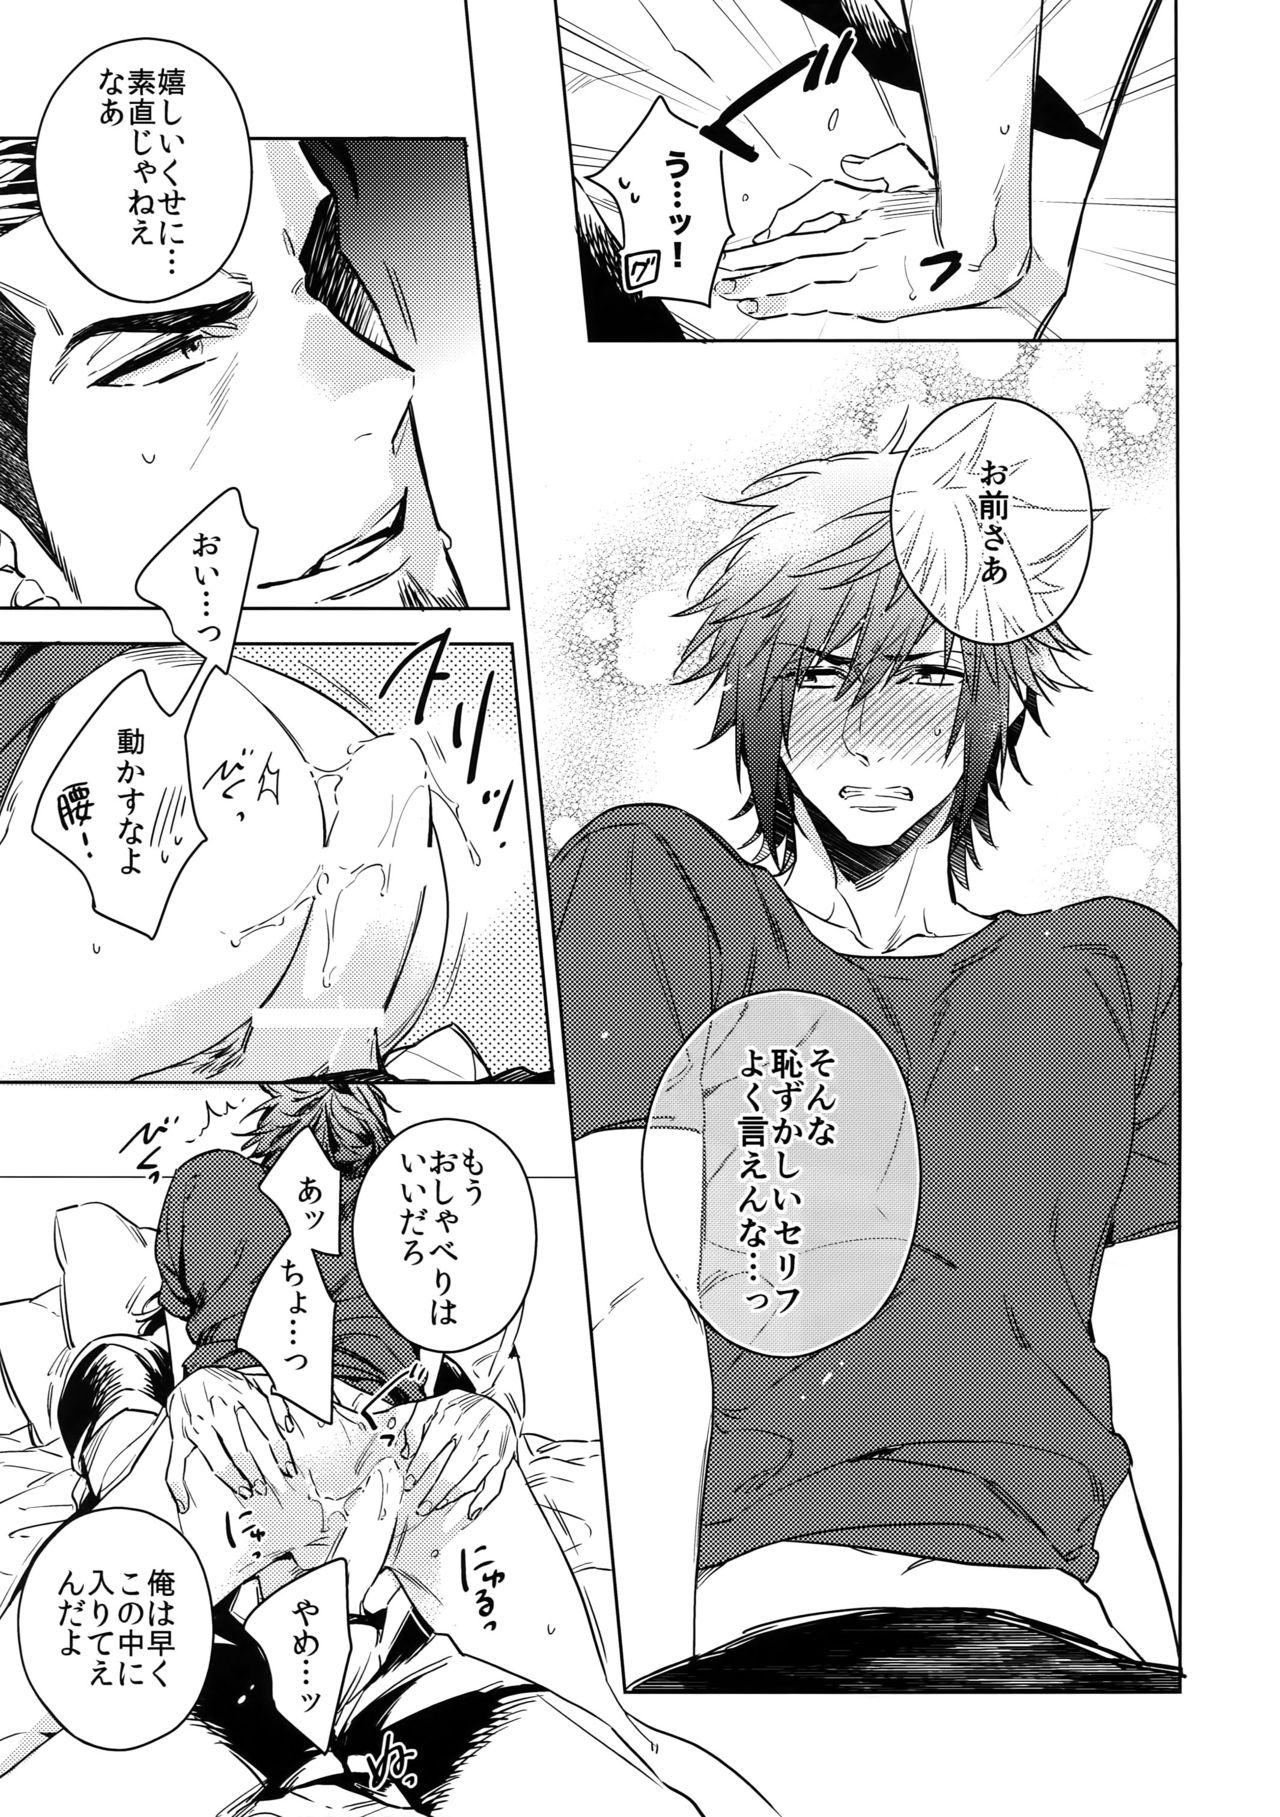 Tanned You Are My King - Final fantasy xv Ano - Page 12